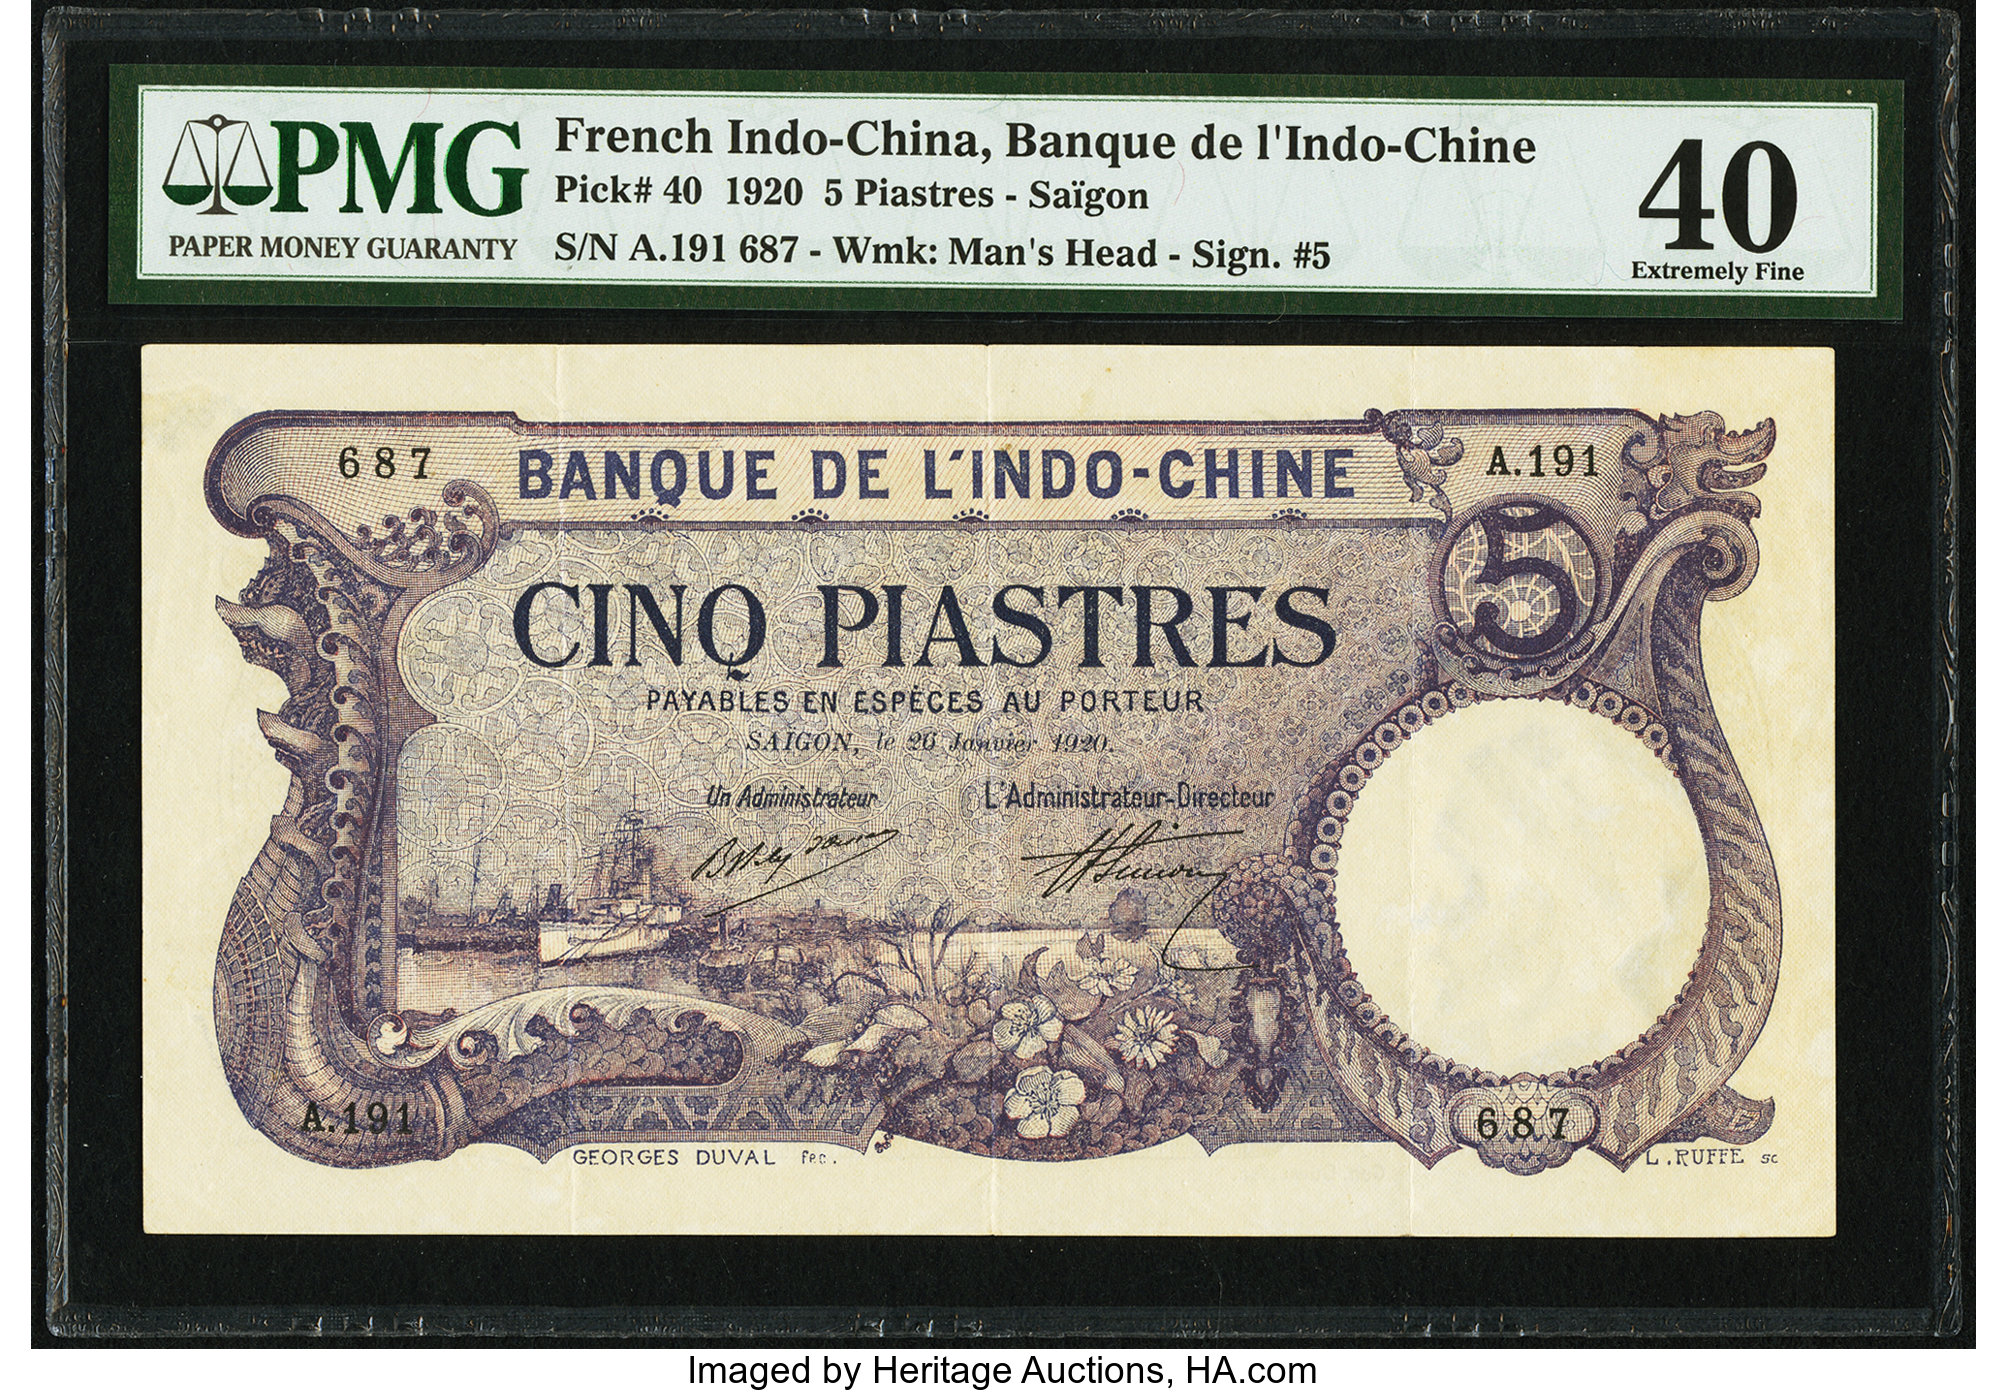 French Indochina Banque De L Indo Chine Saigon 5 Piastres Lot Heritage Auctions